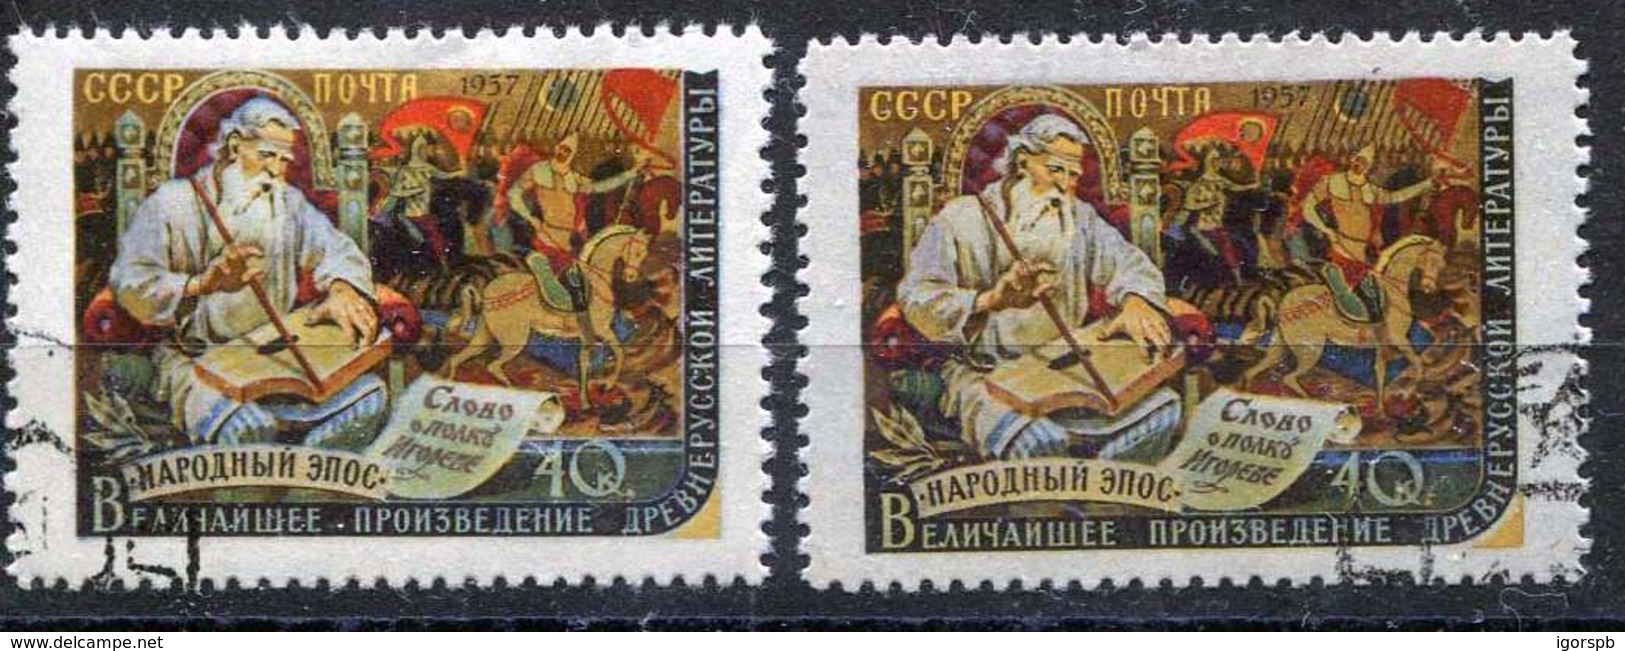 Russia , SG 2076 ,SG 2076a ;1957,"The Tale Of The Host Of Igor",single,cancelled - Oblitérés